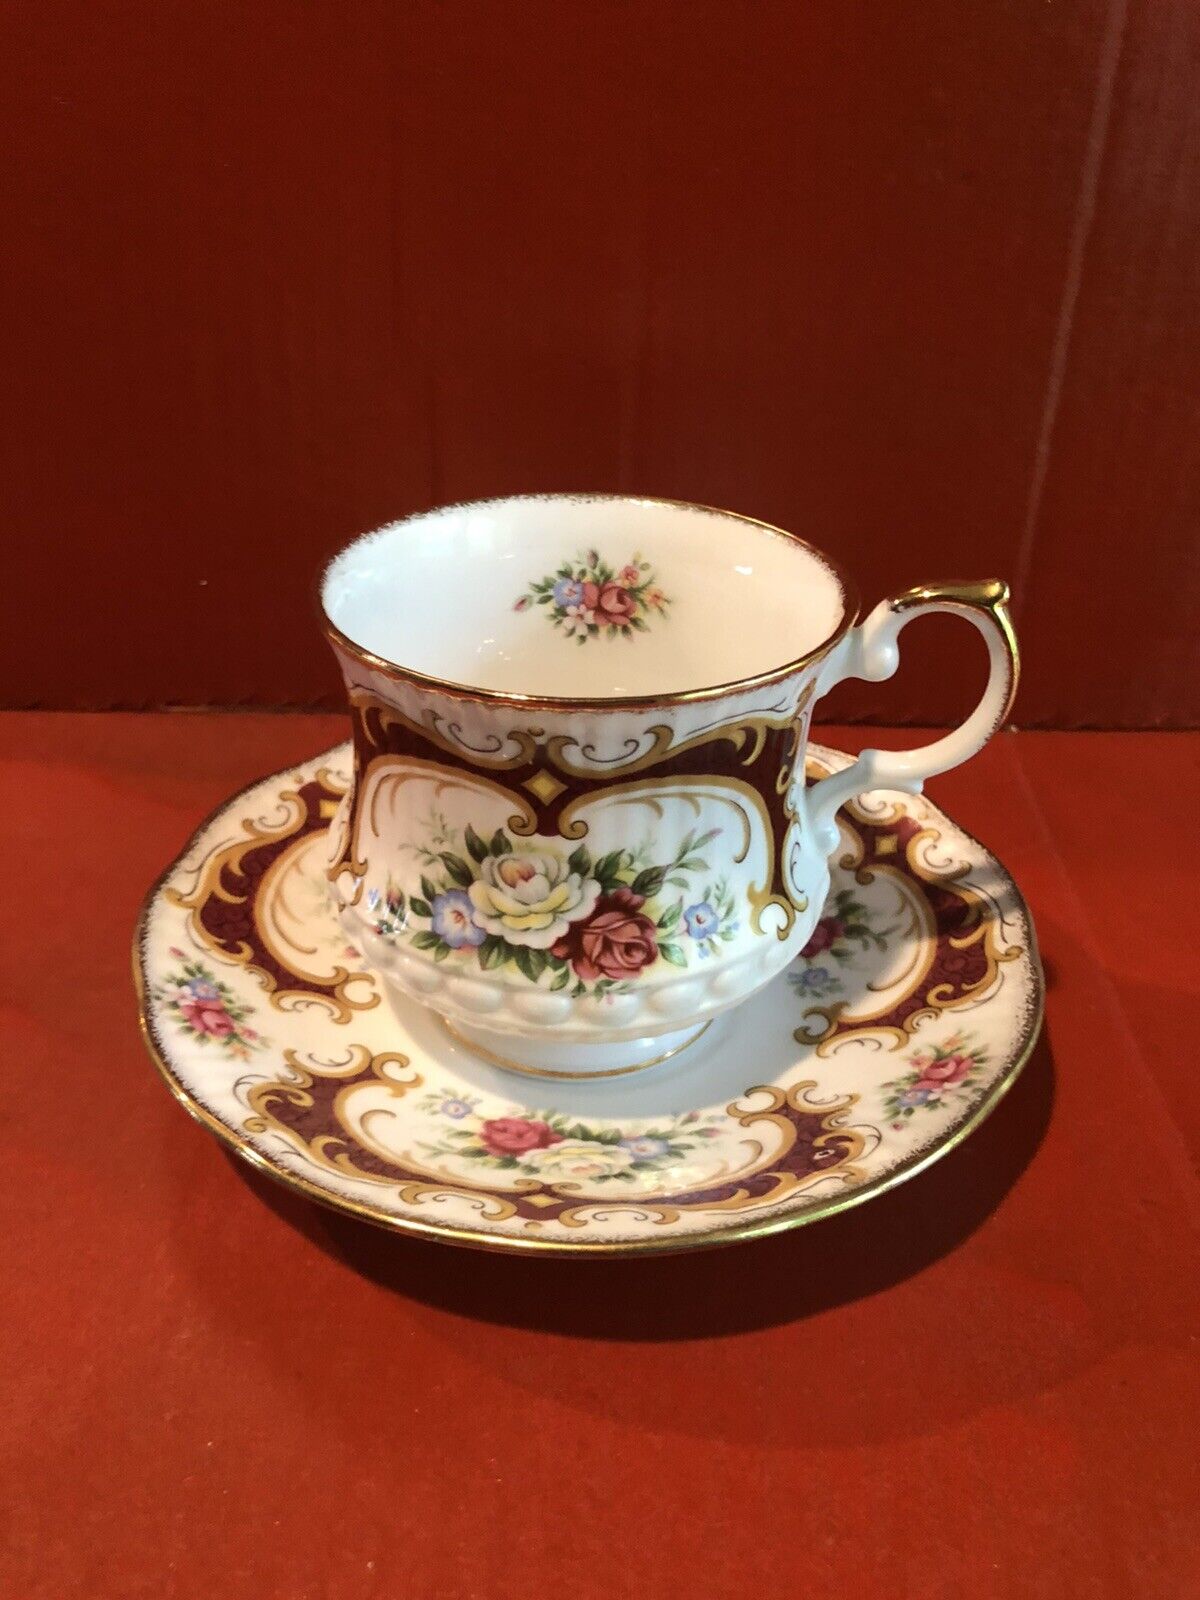 Queens Rosina England Flower Coffee Tea Saucer Cup Free shipping New Year-end gift and